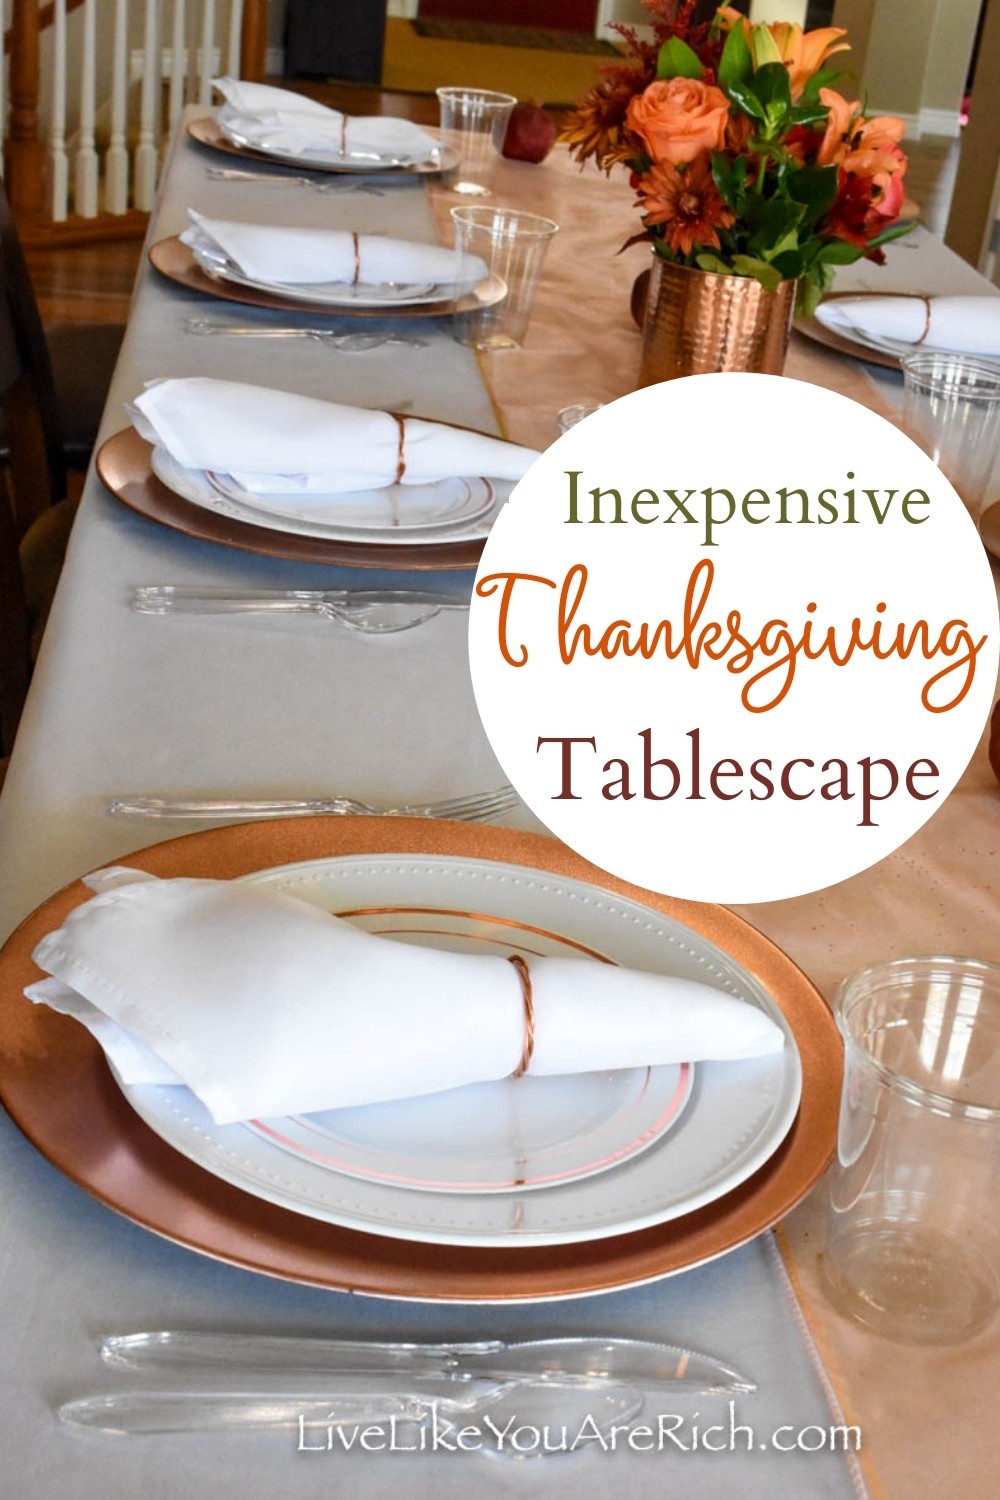  If you don’t have fine china, crystal, and real silverware, you can still have a nice looking tablescape! This inexpensive thanksgiving tablescape cost less than $35.00 to put together, plus there was little-to-no clean up. I’ll share my money-saving tips below. Here is how to create a nice looking yet inexpensive tablescape for under $35.00. #thanksgiving #thanksgivingtablescape